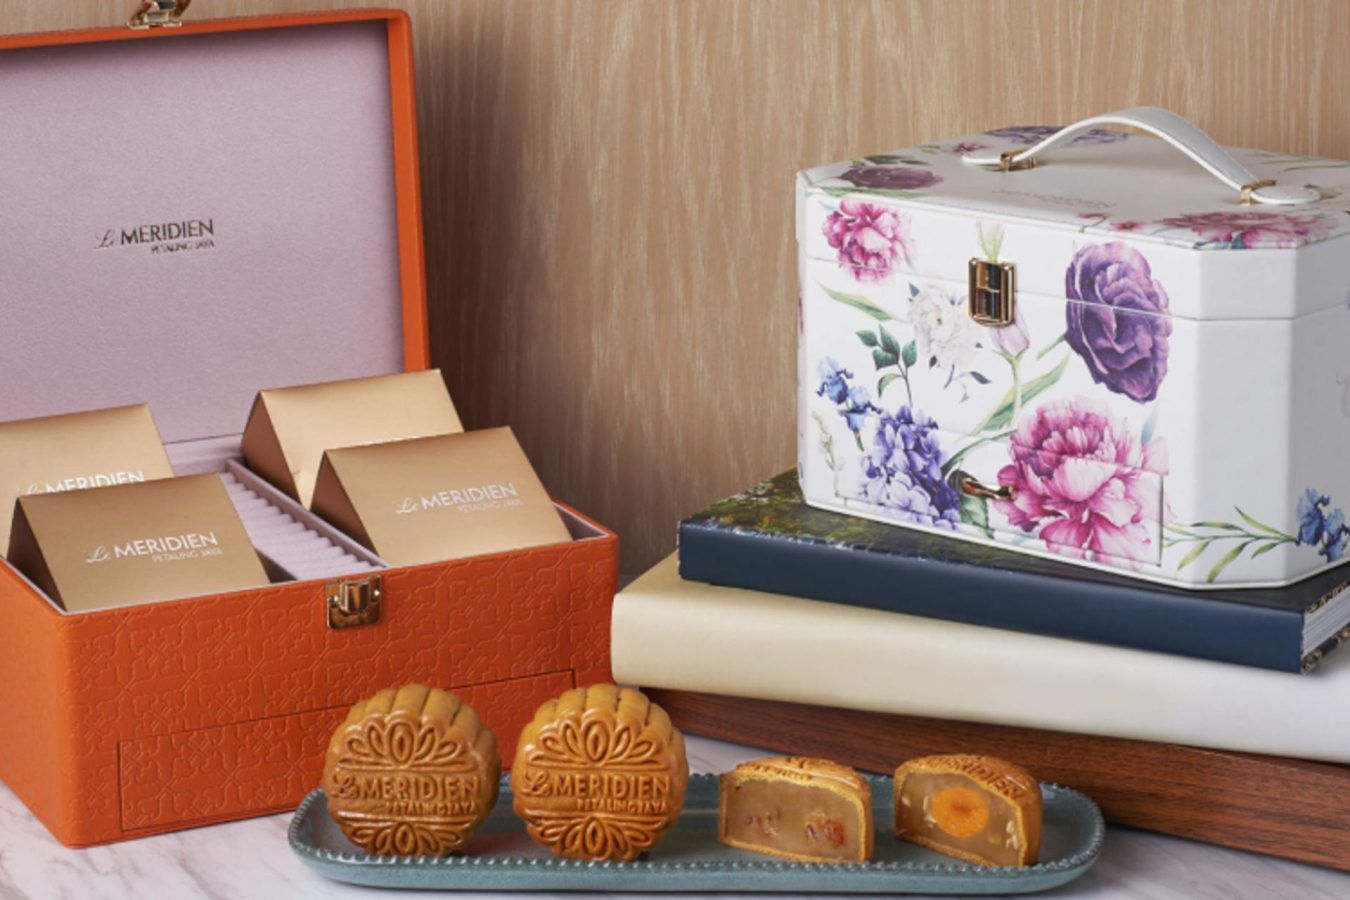 In a gifting mood? Consider Le Meridien PJ’s opulent mooncake collection